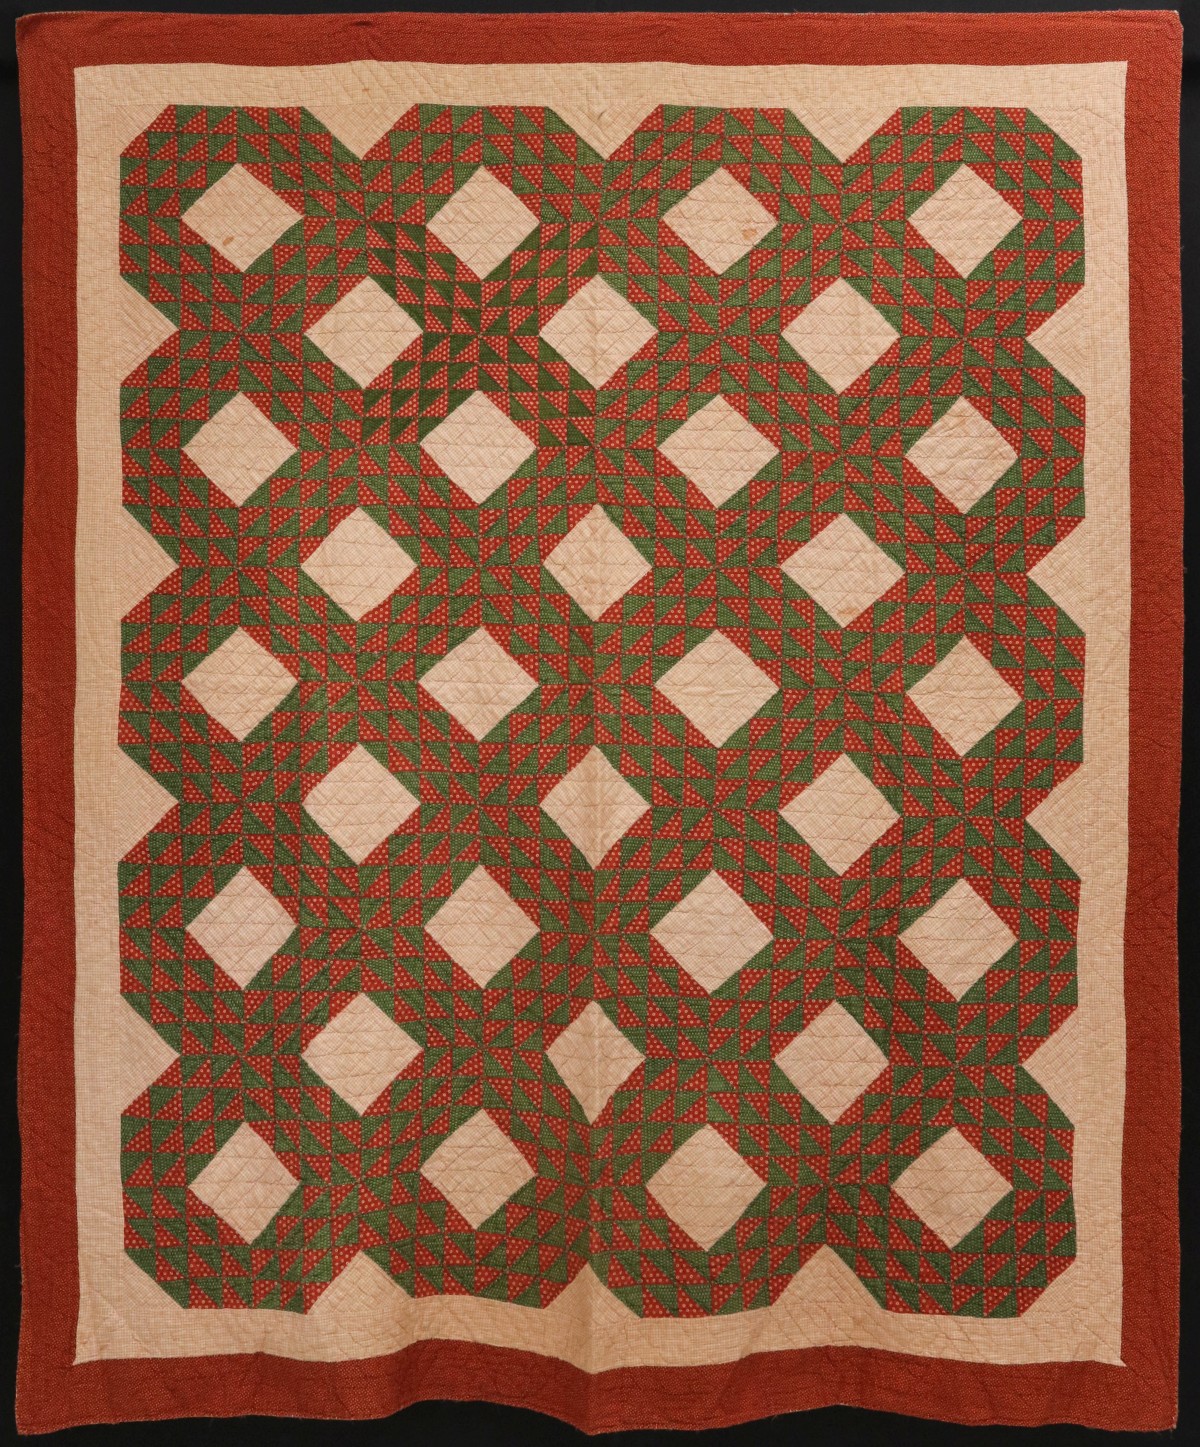 AN ANTIQUE 'OCEAN WAVE' PATTERN QUILT IN RED AND GREEN